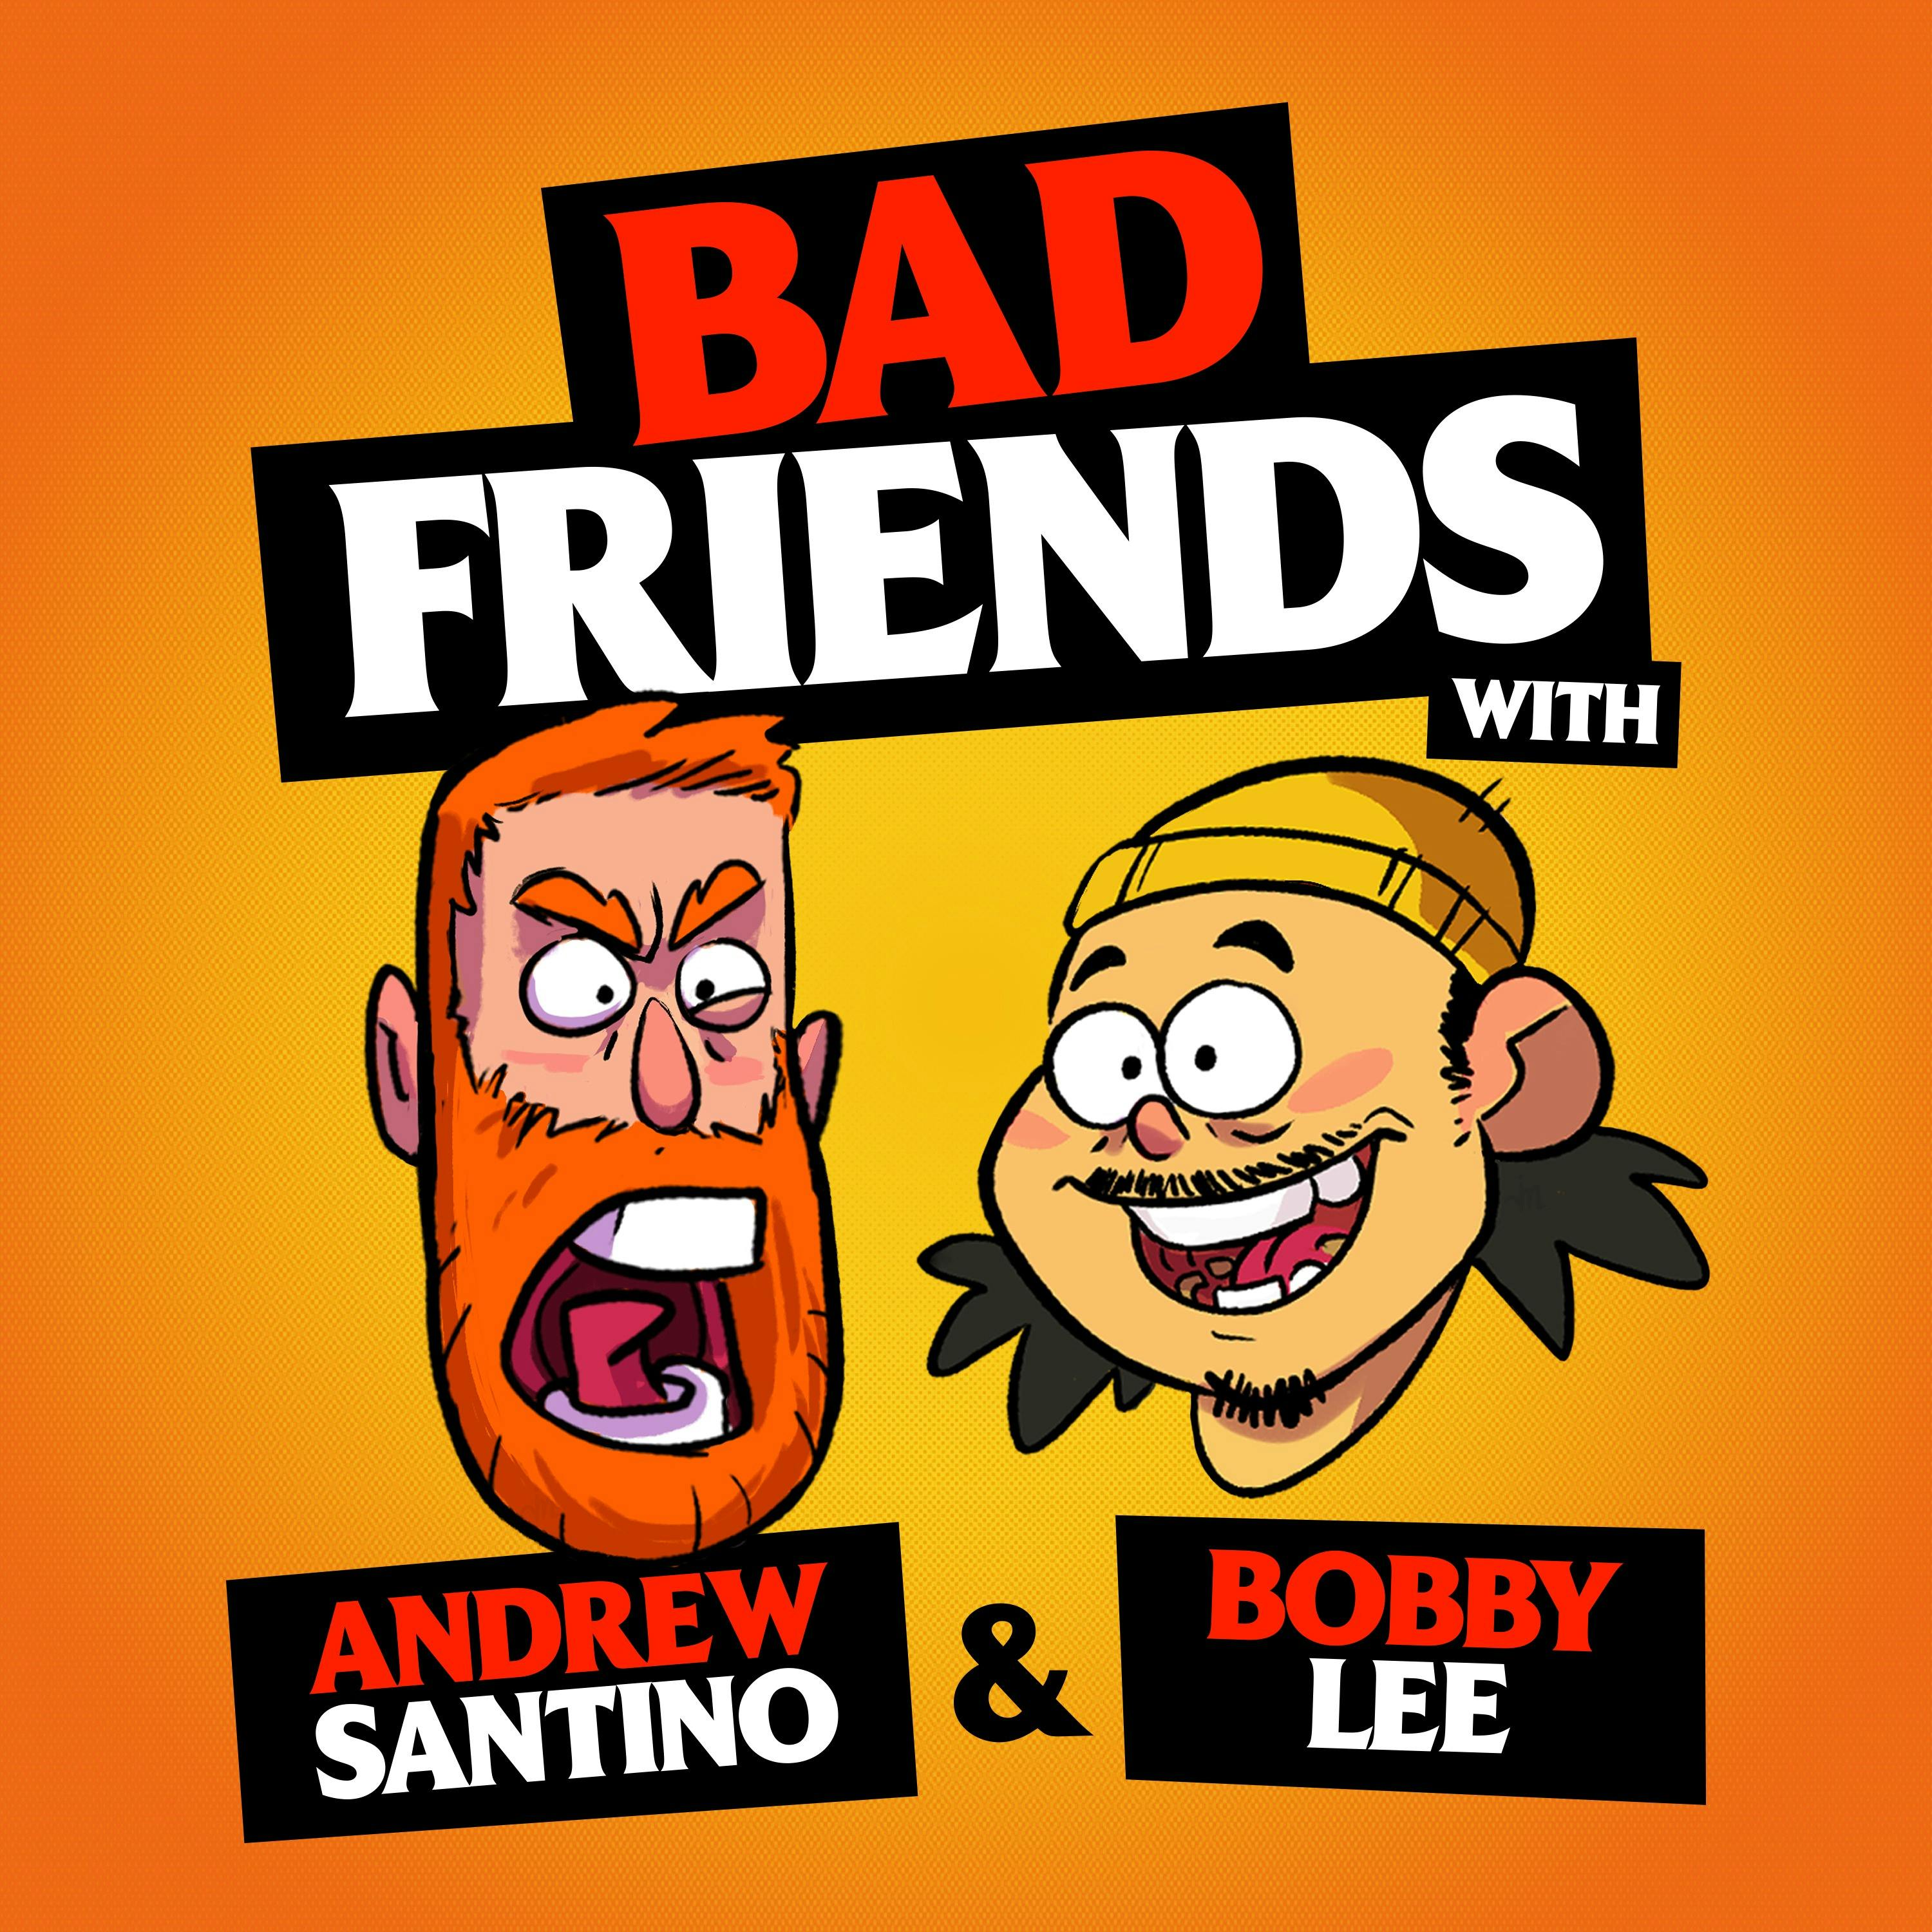 Should I Be Scared? by Andrew Santino and Bobby Lee